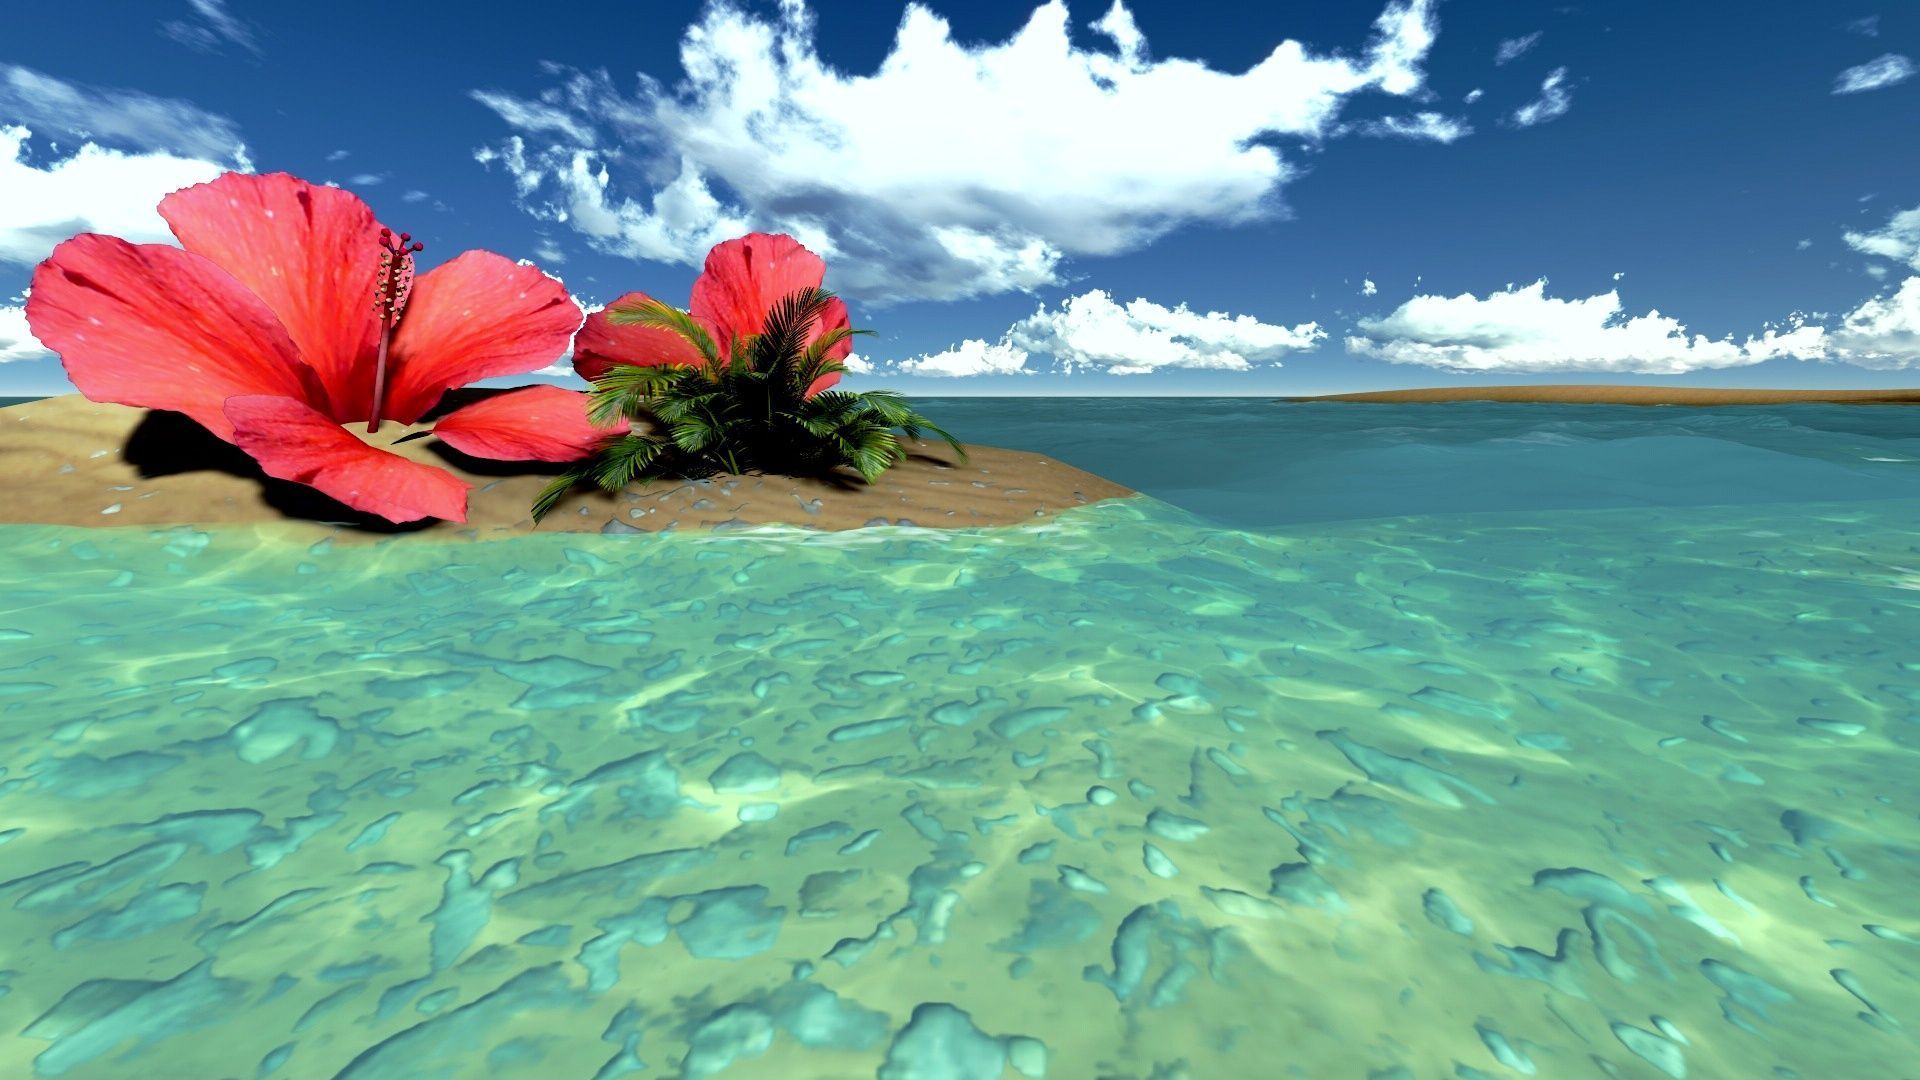 Tropical Background Wallpaper HD Free Download | New HD Wallpapers ...